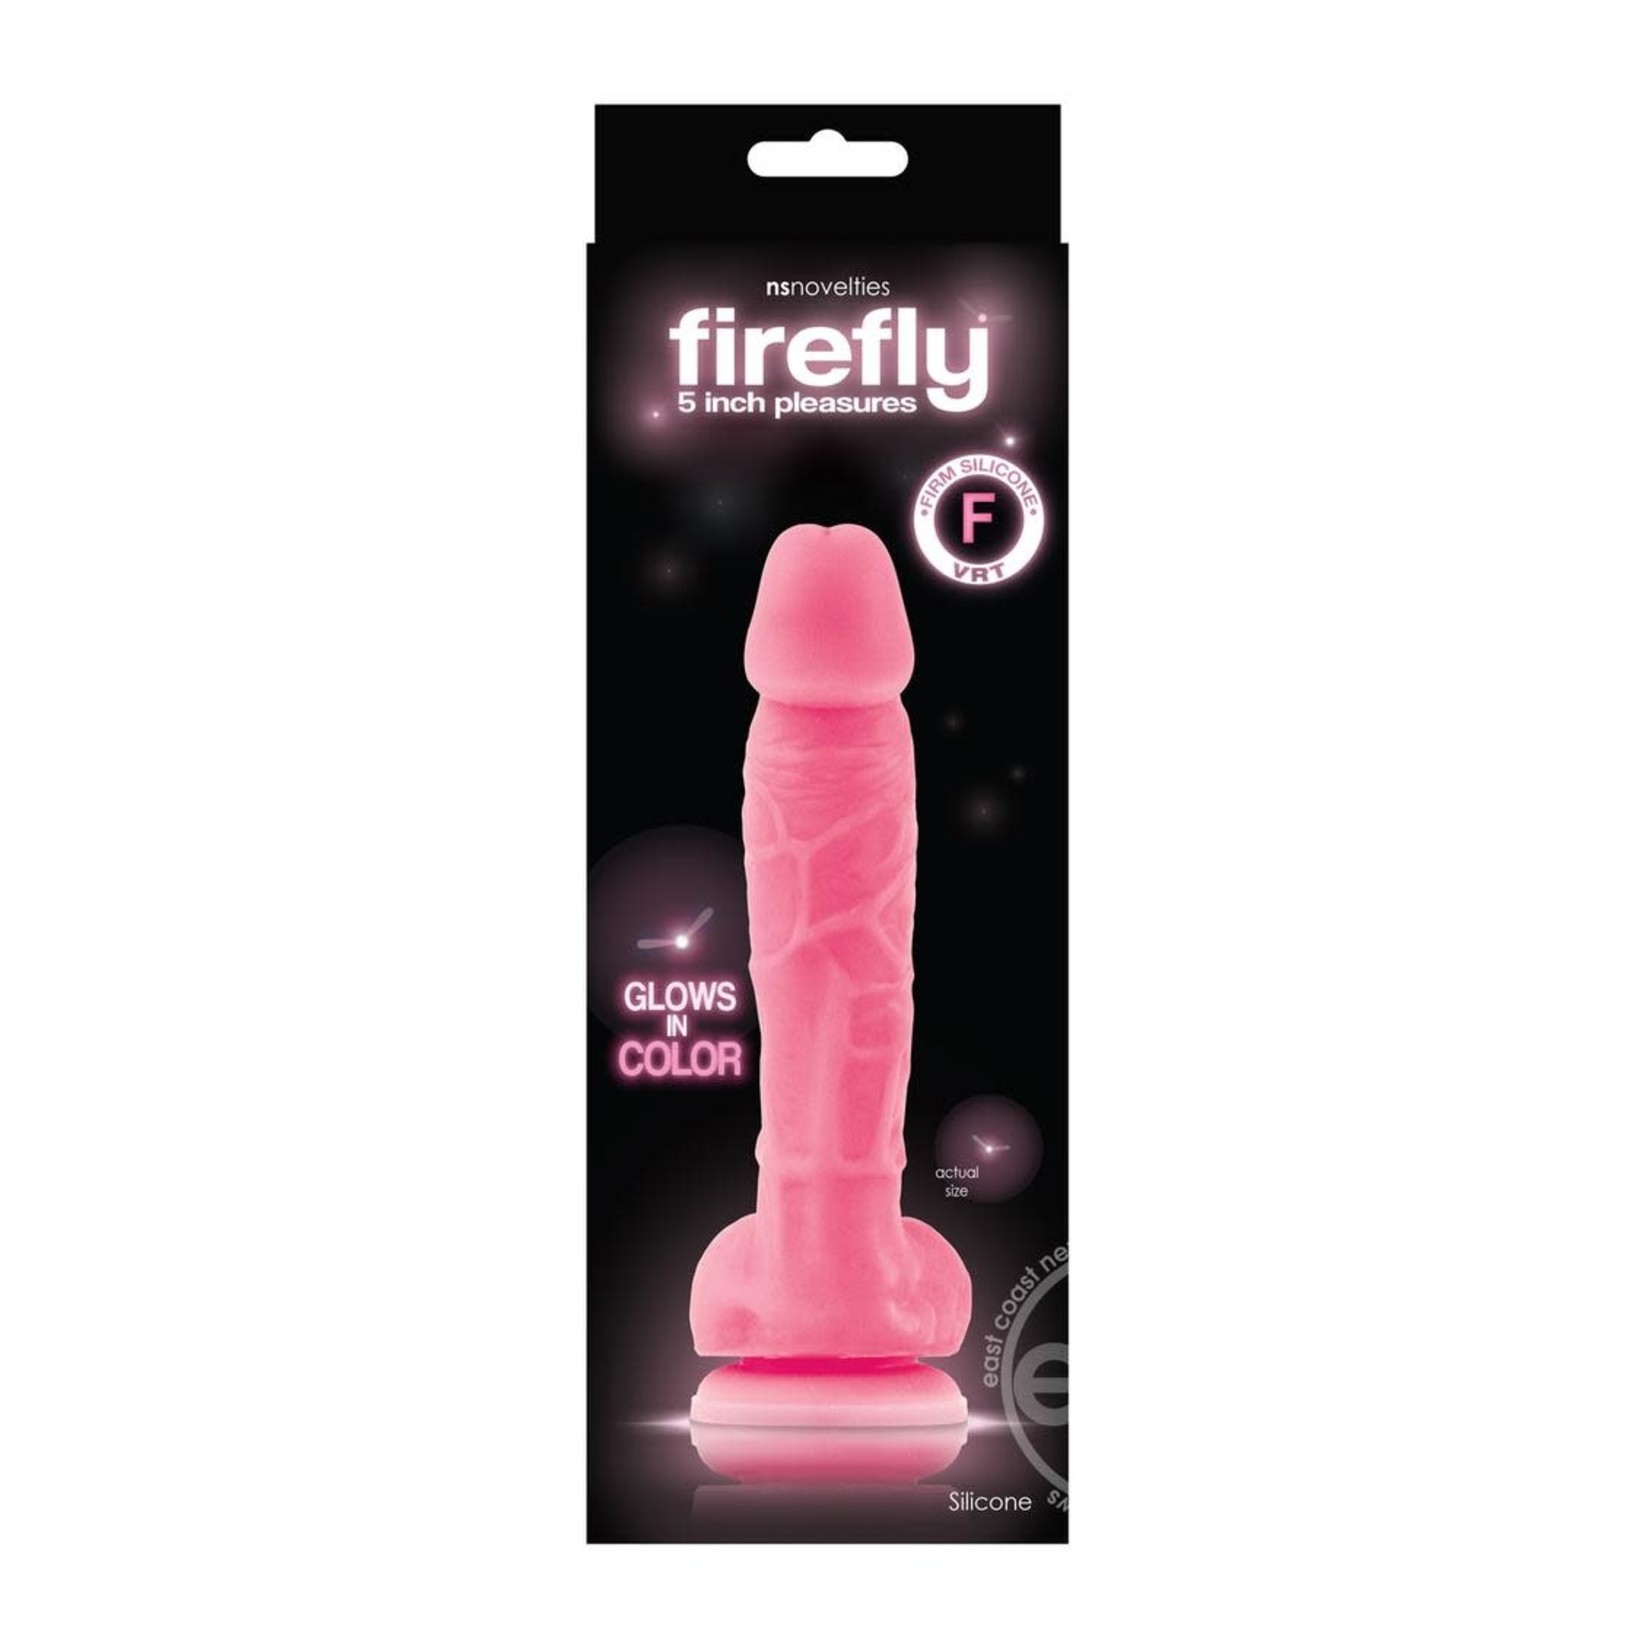 Firefly 5 Inch Pleasures Silicone Glow In The Dark Dildo 5in - Pink